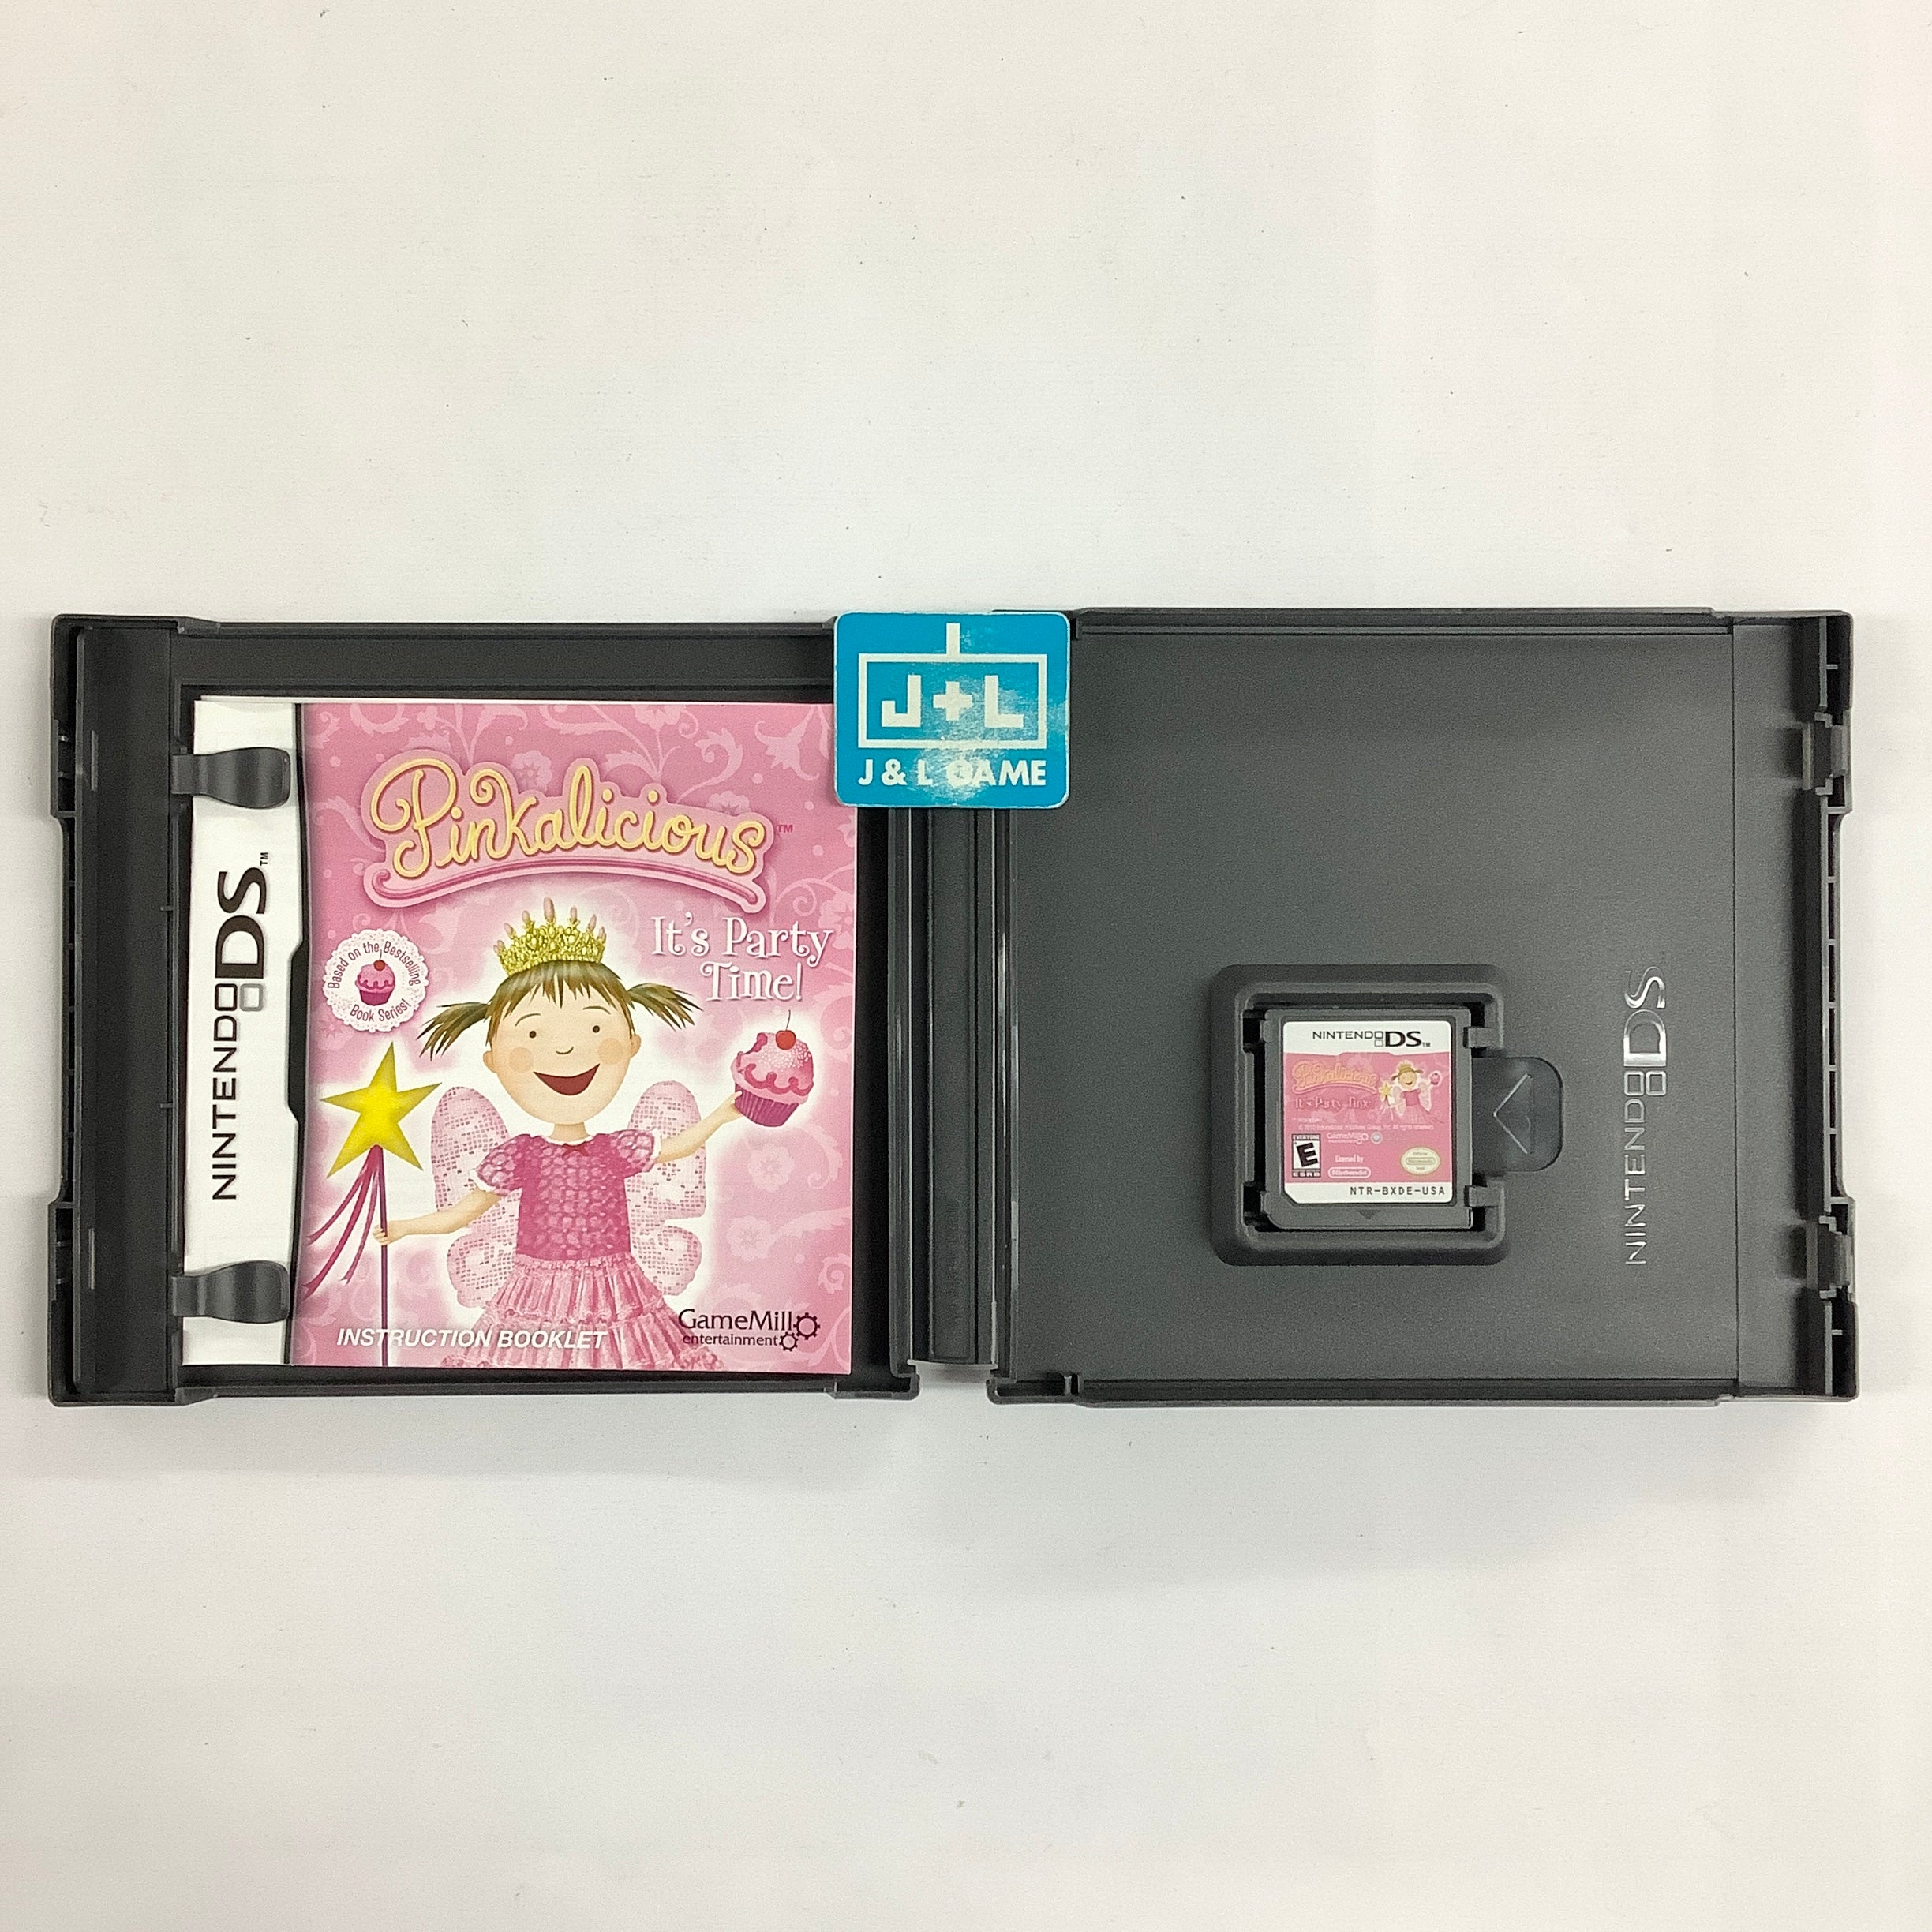 Pinkalicious - (NDS) Nintendo DS [Pre-Owned] Video Games GameMill Publishing   